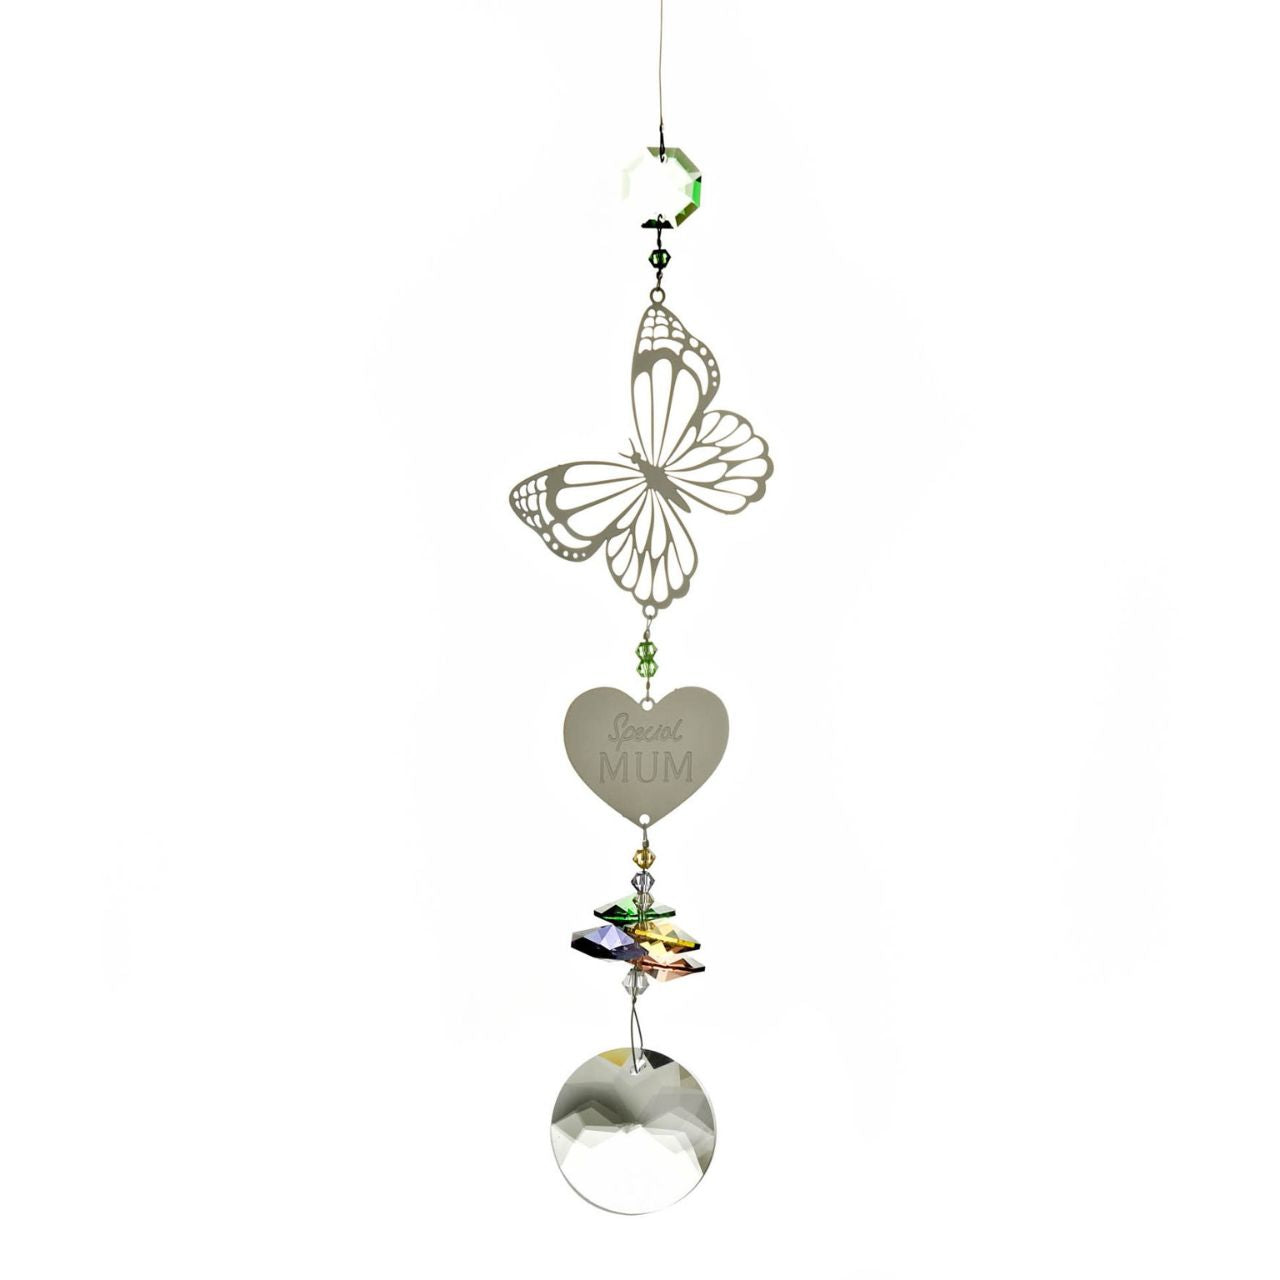 Suncatcher The Cottage Garden Crystal Hanger Butterfly "Mum"  A butterfly crystal hanger from The Cottage Garden by CELEBRATIONS®.  This wonderfully decorated crystal hanger is a heartfelt dedication to mothers.